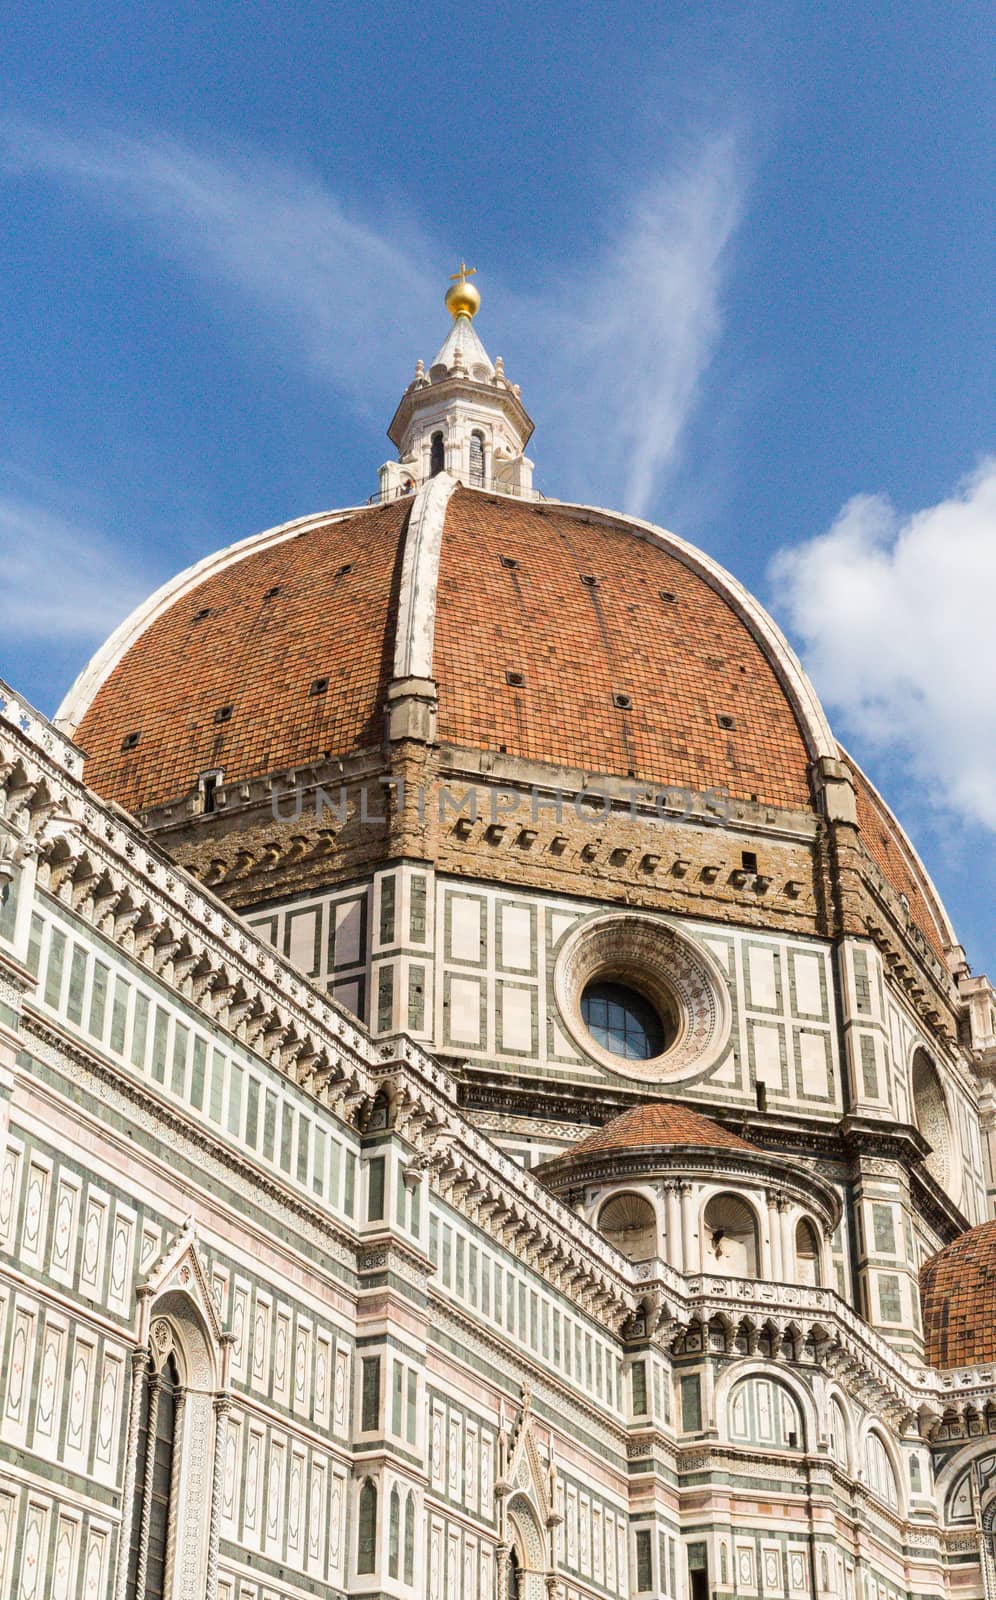 The Dome of Florence Cathedral is the main church of Florence, Italy. Il Duomo di Firenze, as it is ordinarily called, was begun in 1296